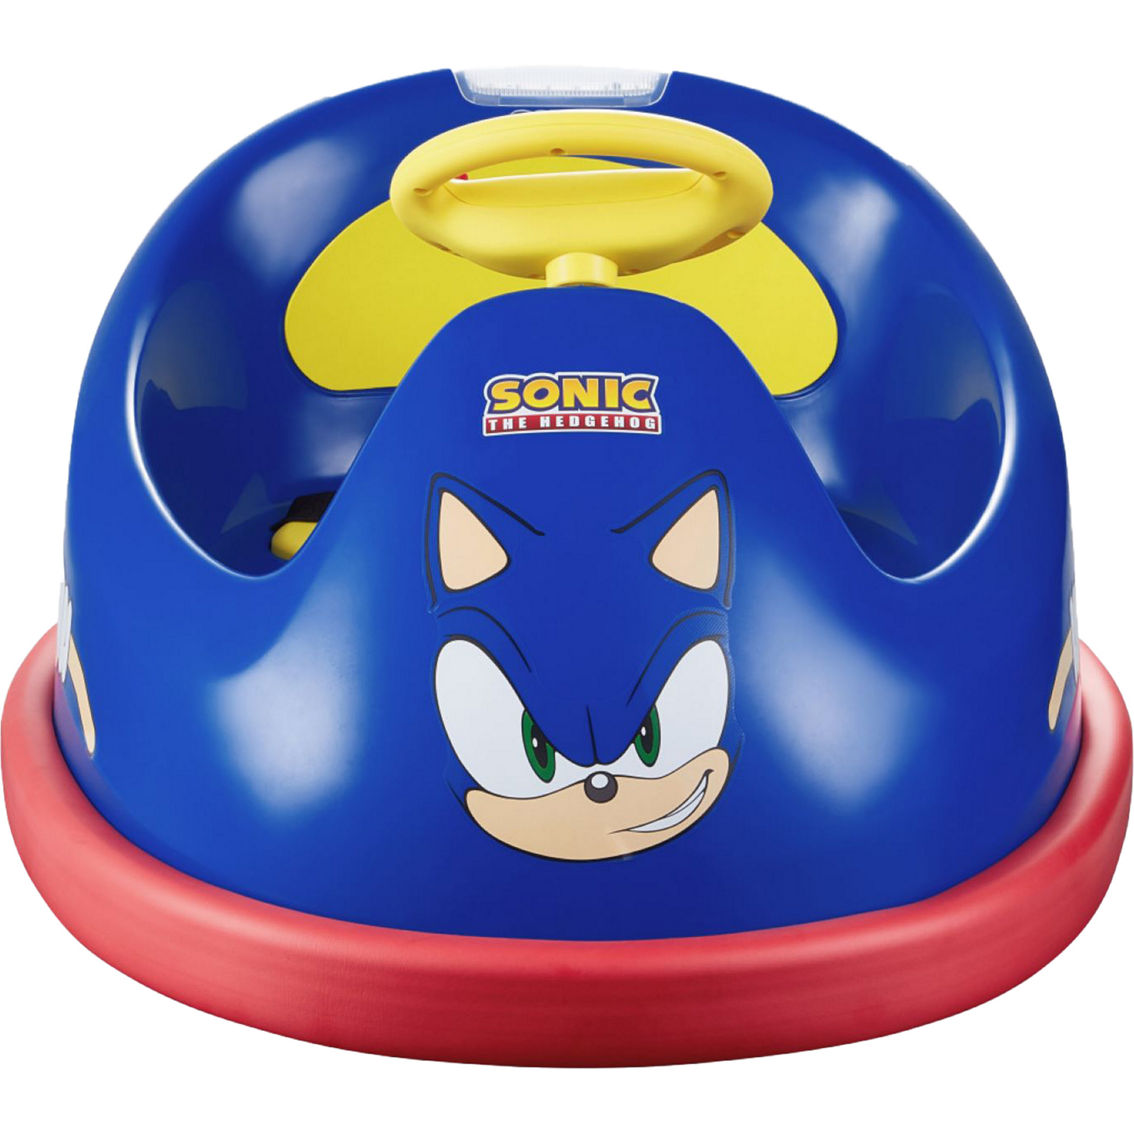 Sonic the Hedgehog Electric Ride On Bumper Car - Image 2 of 8